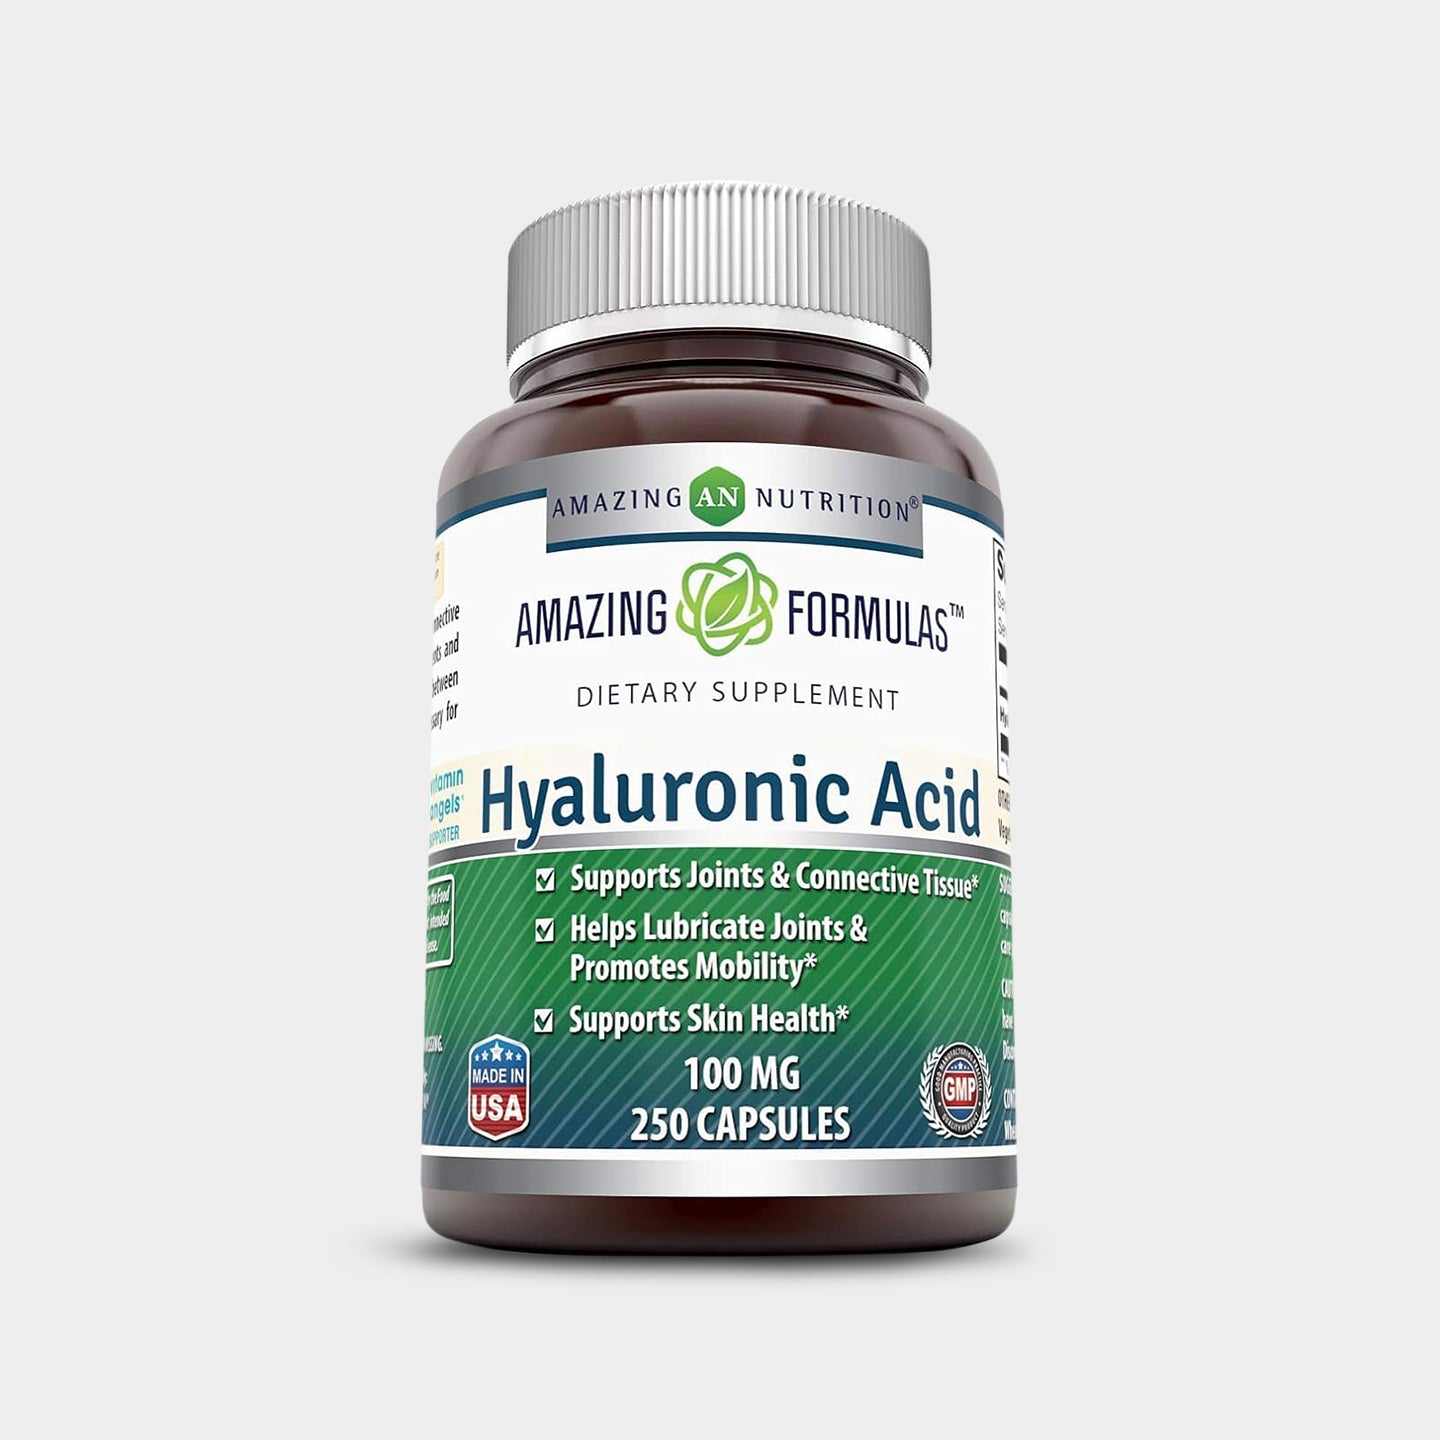 Amazing Nutrition Amazing Formulas Hyaluronic Acid 100 Mg, Unflavored, 250 Capsules A1